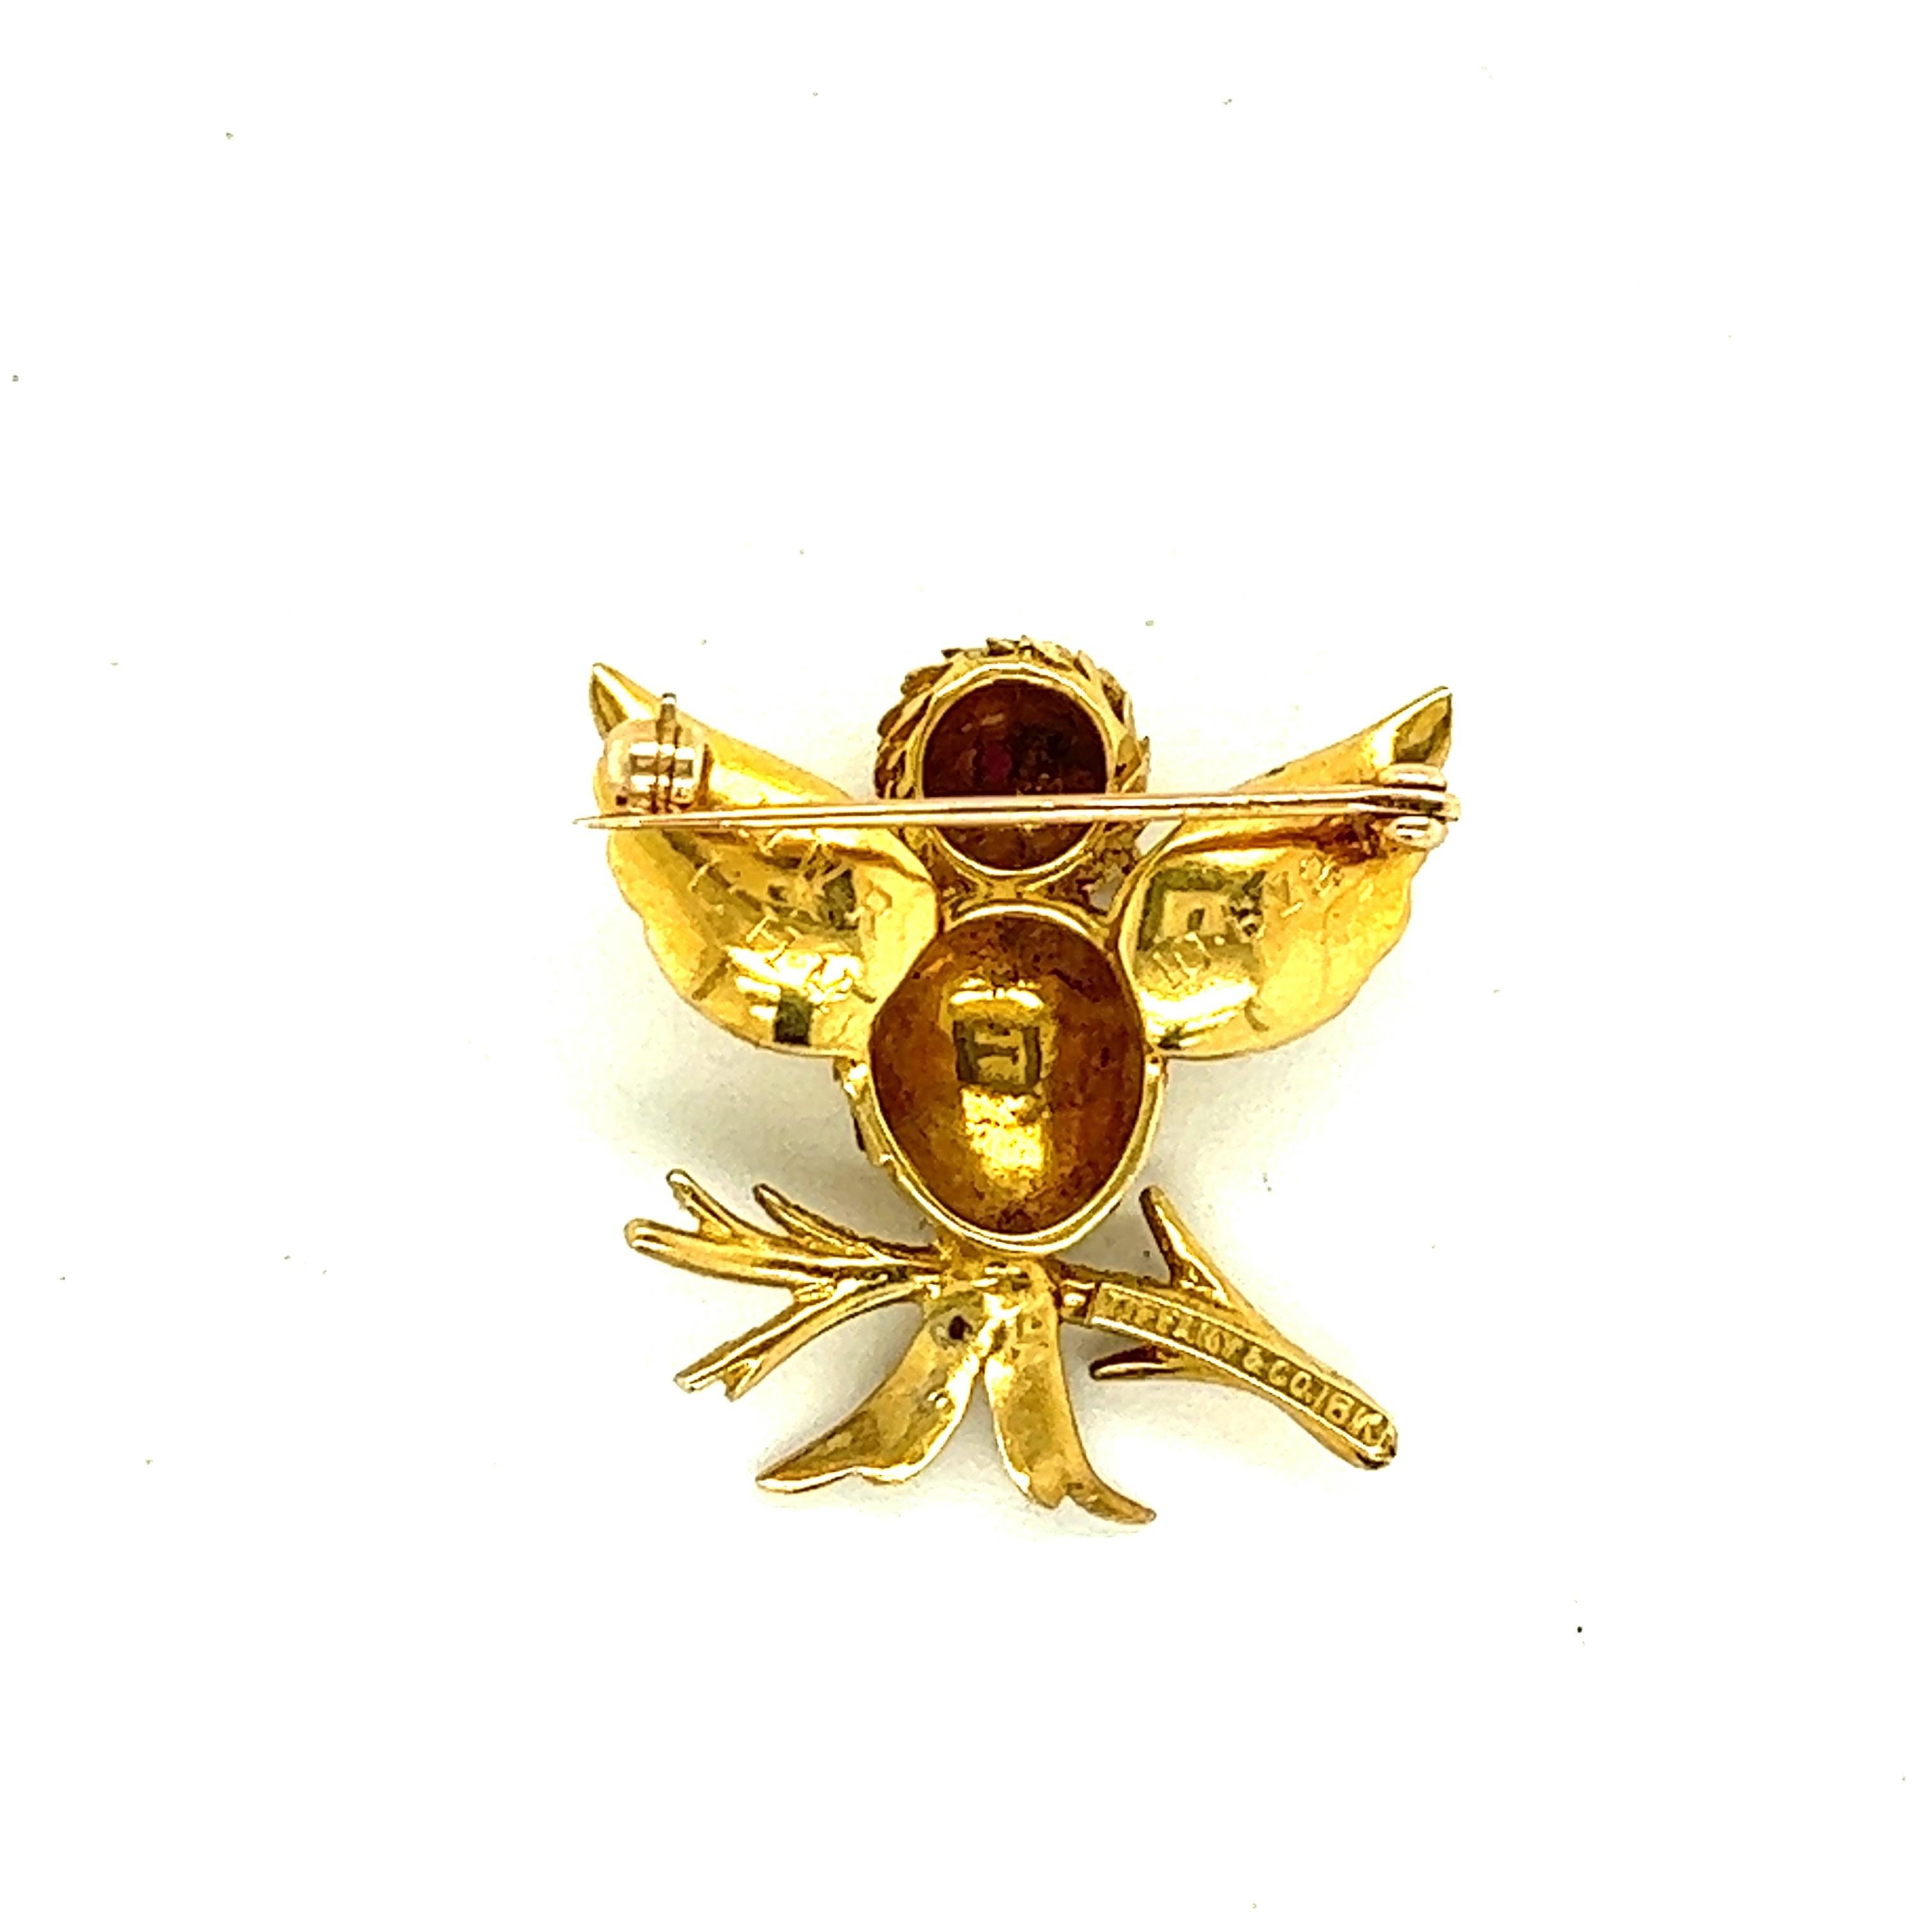 Tiffany & Co. Small Ruby 18k Yellow Gold Bird Brooch For Sale 2